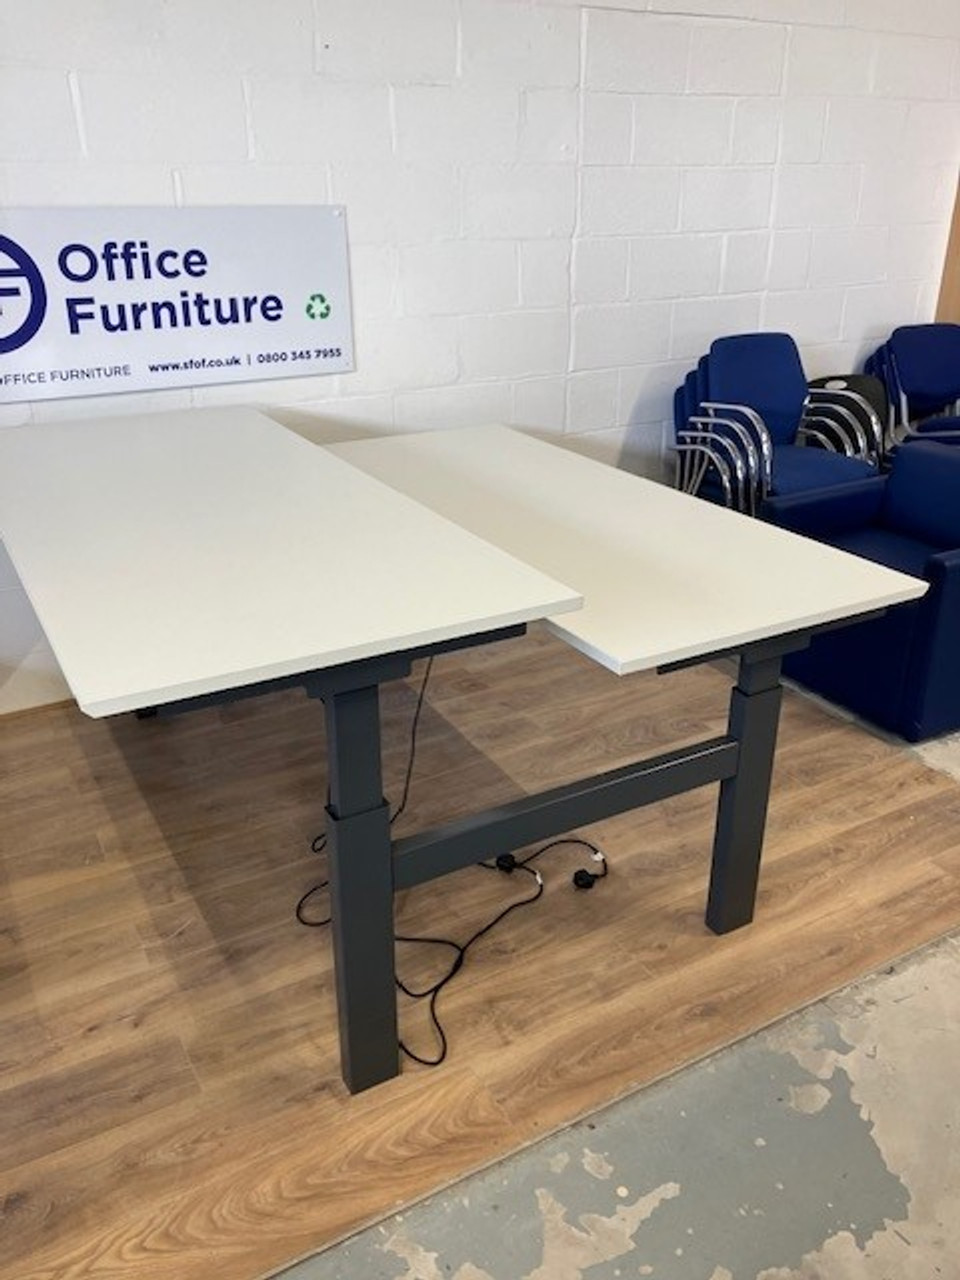 Used office furniture essex_office furniture showroom chelmsford_second hand height adjustable sit stand bench desk essex Humanscale 